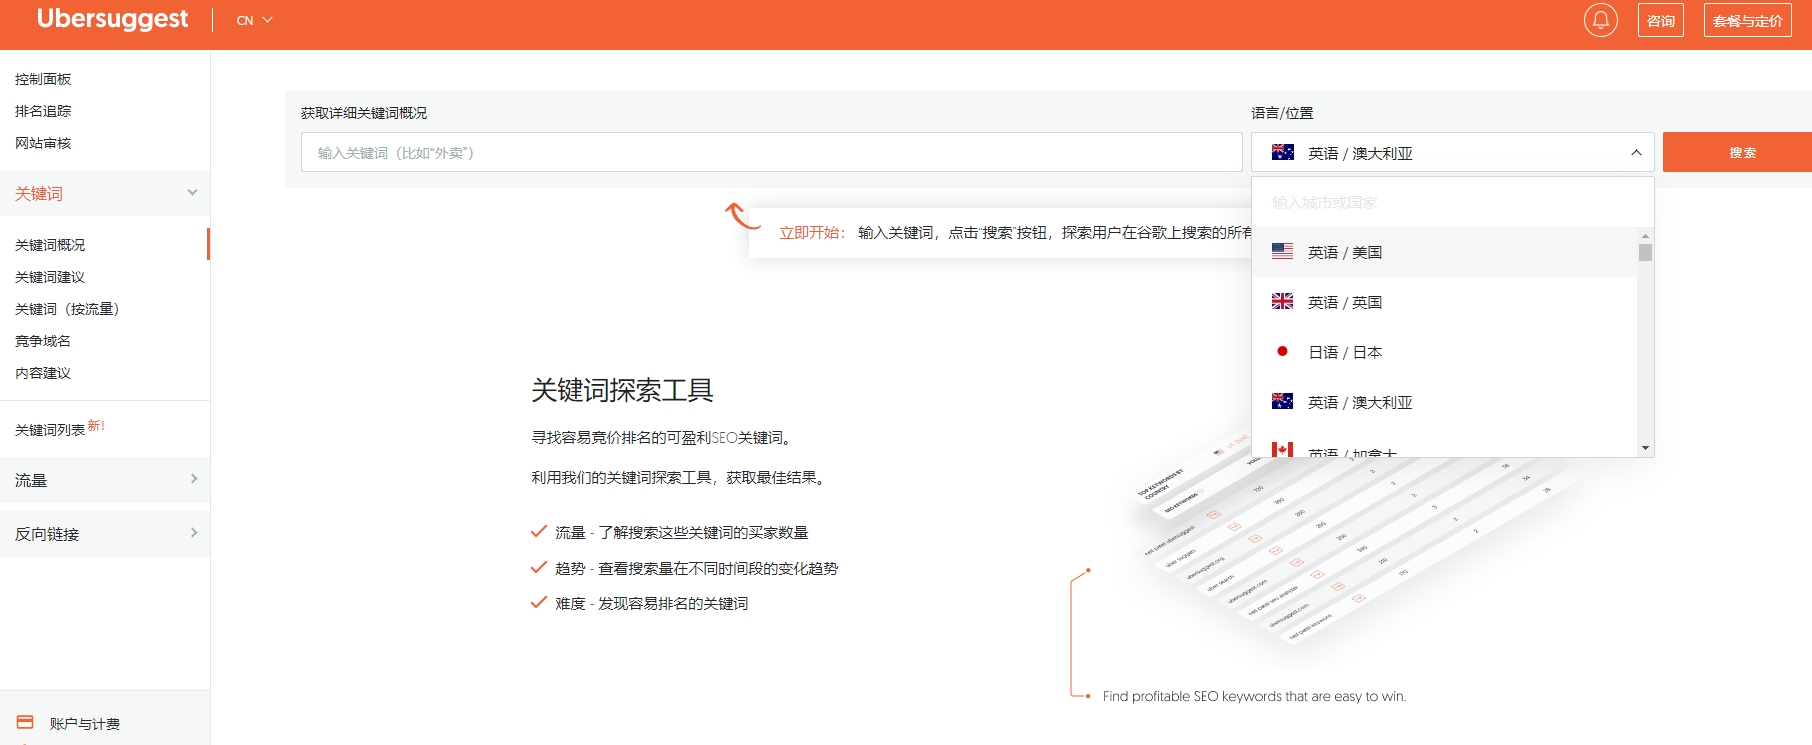 ubersuggest-keywords-chinese-area-severive-disappear